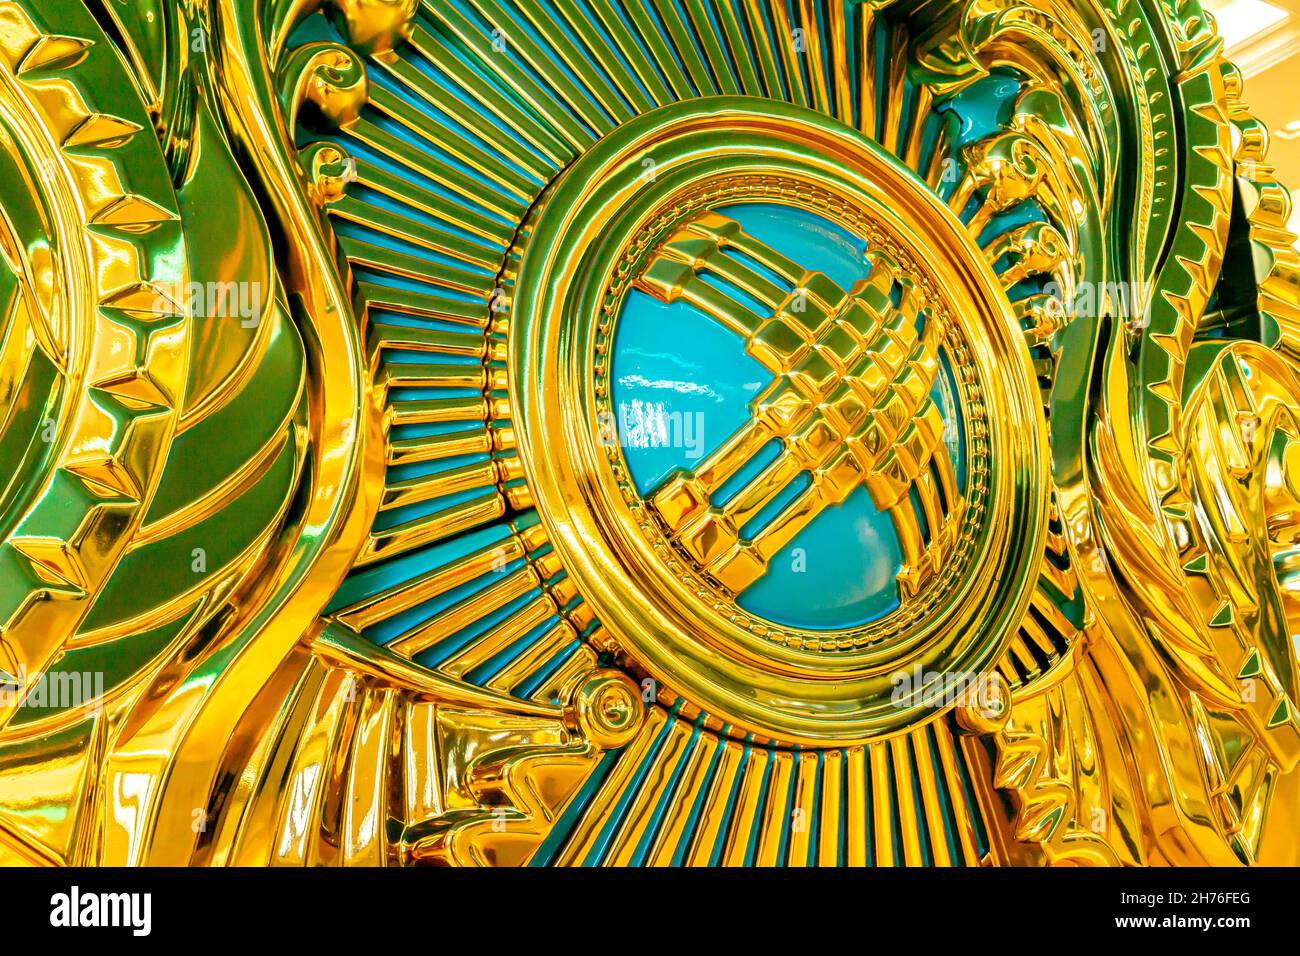 Big gilded model of national emblem and coat of arms of Kazakhstan, on display in National Museum of Kazakhstan, Astana, Nur-Sultan, Kazakhstan Stock Photo